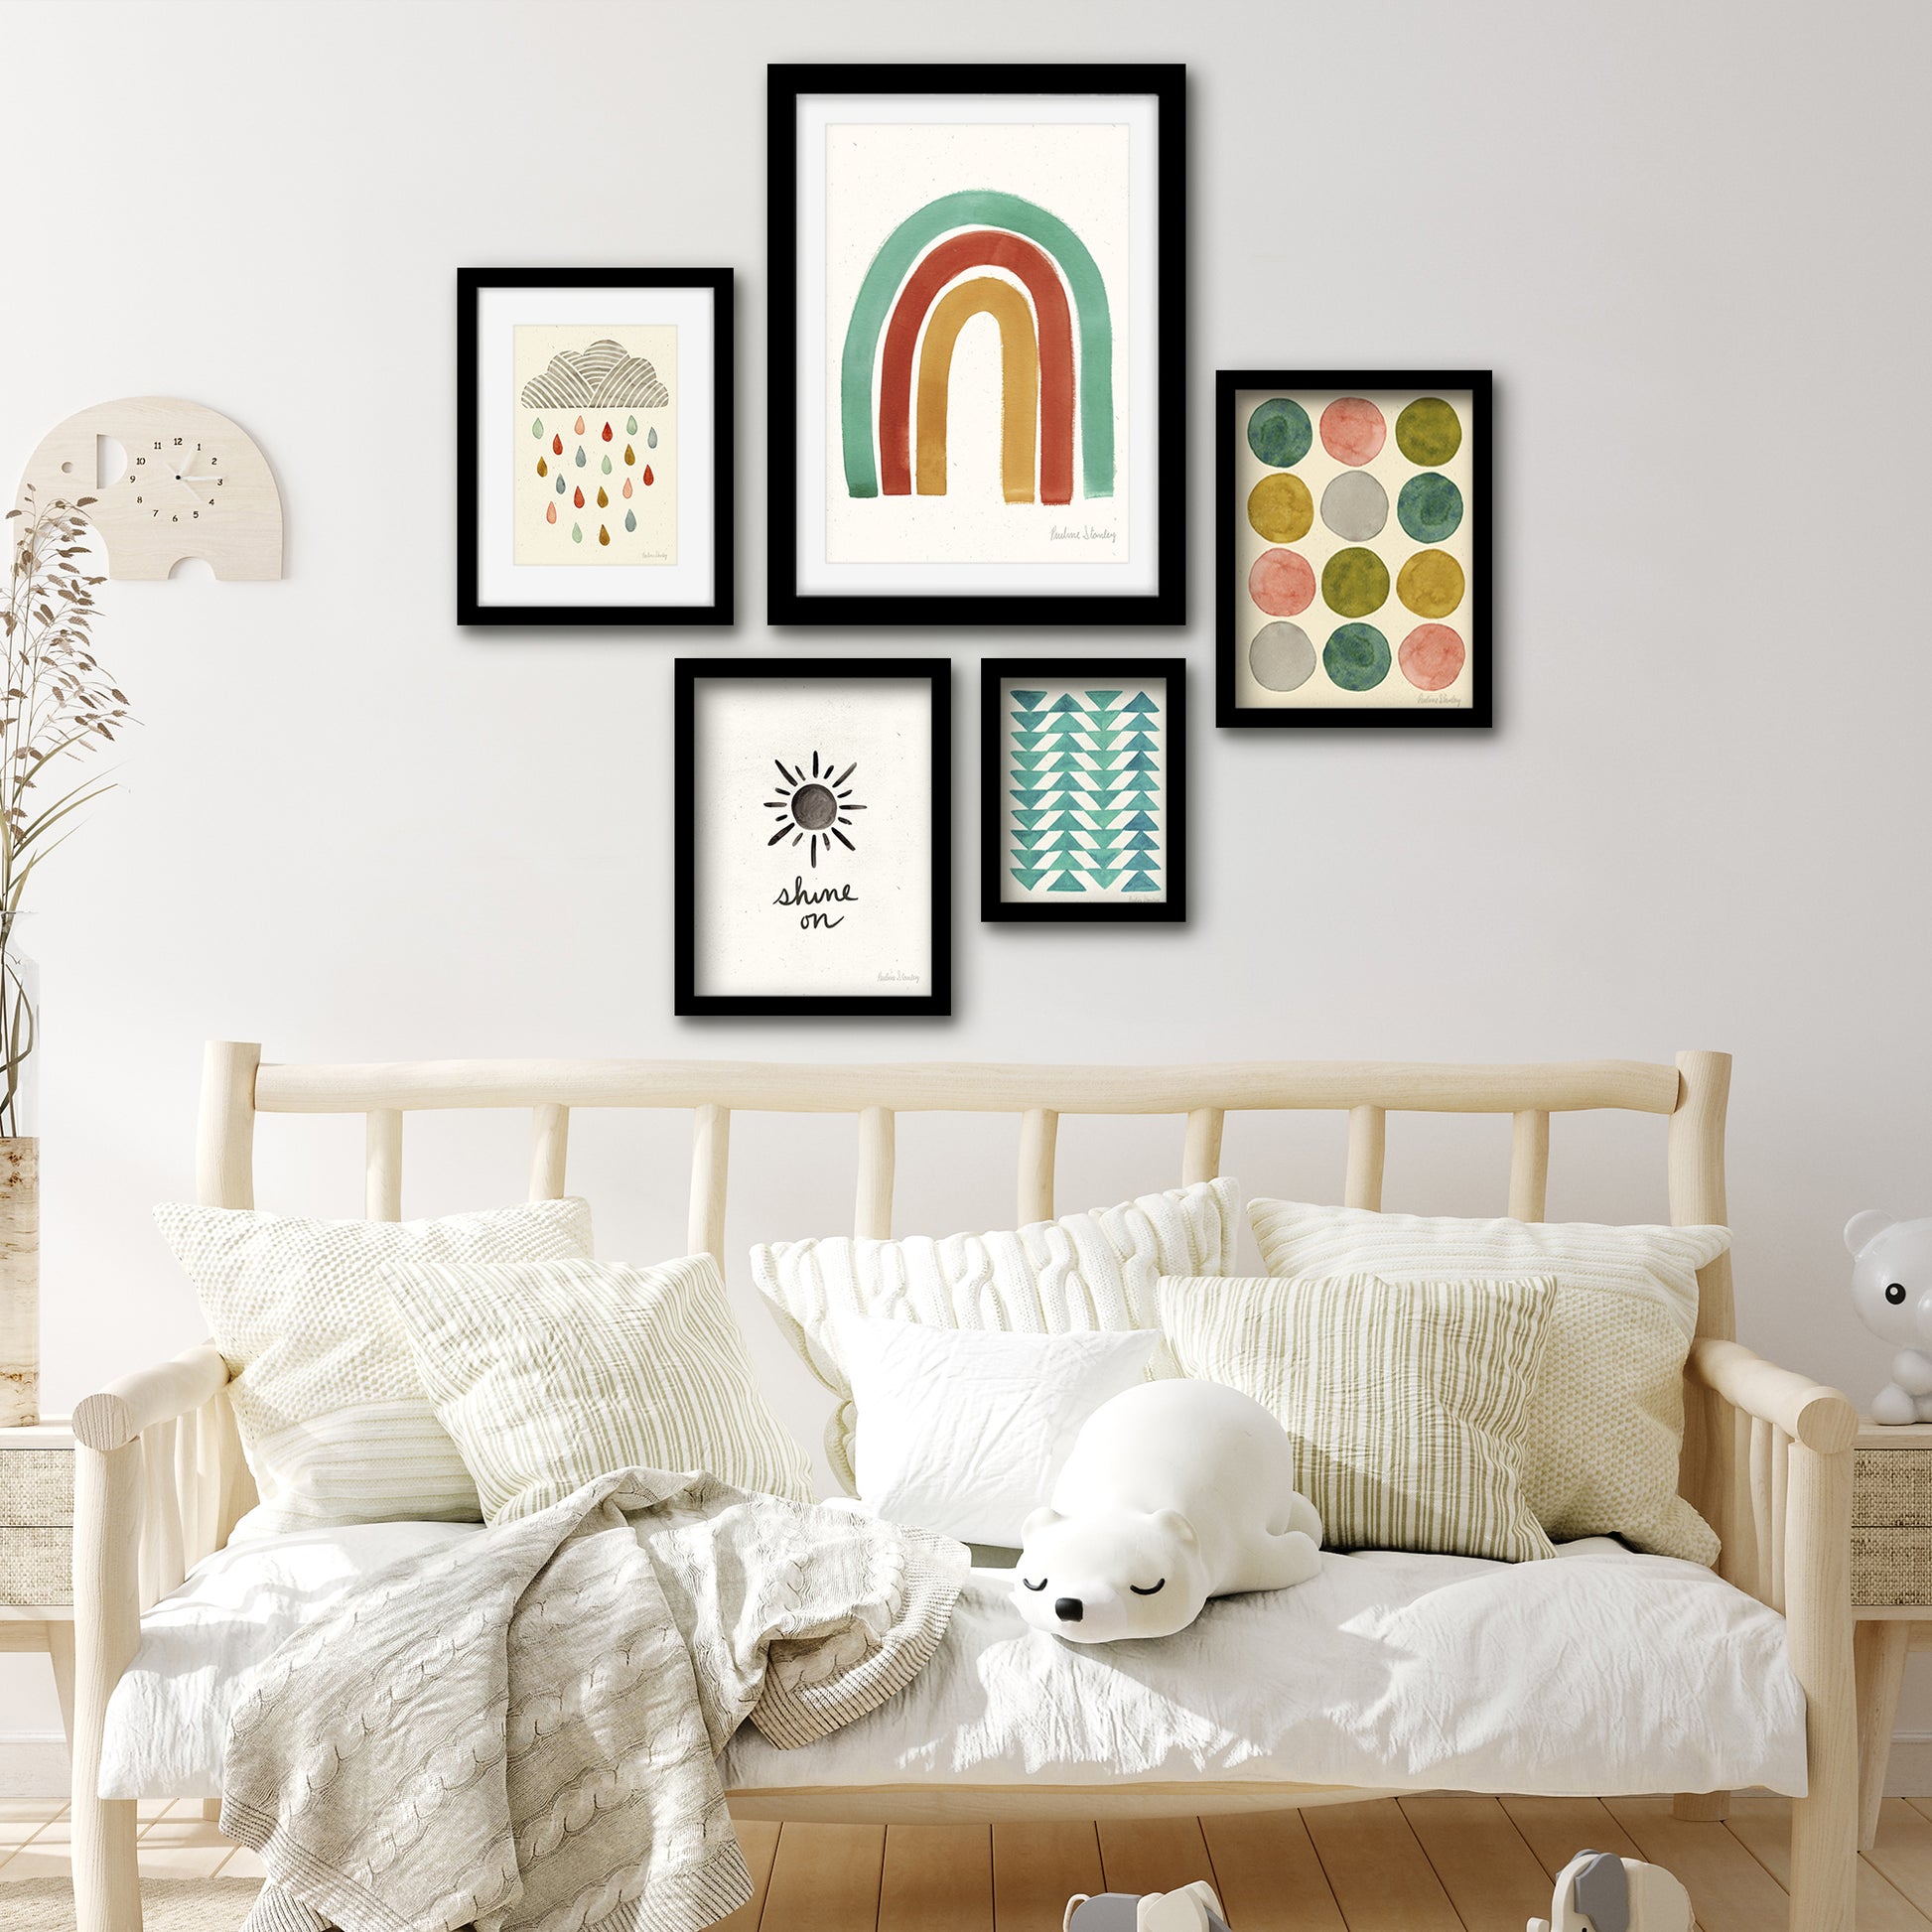 Americanflat 5 Piece Black Framed Gallery Wall Art Set - Colorful Rainbow Shapes Wire Art